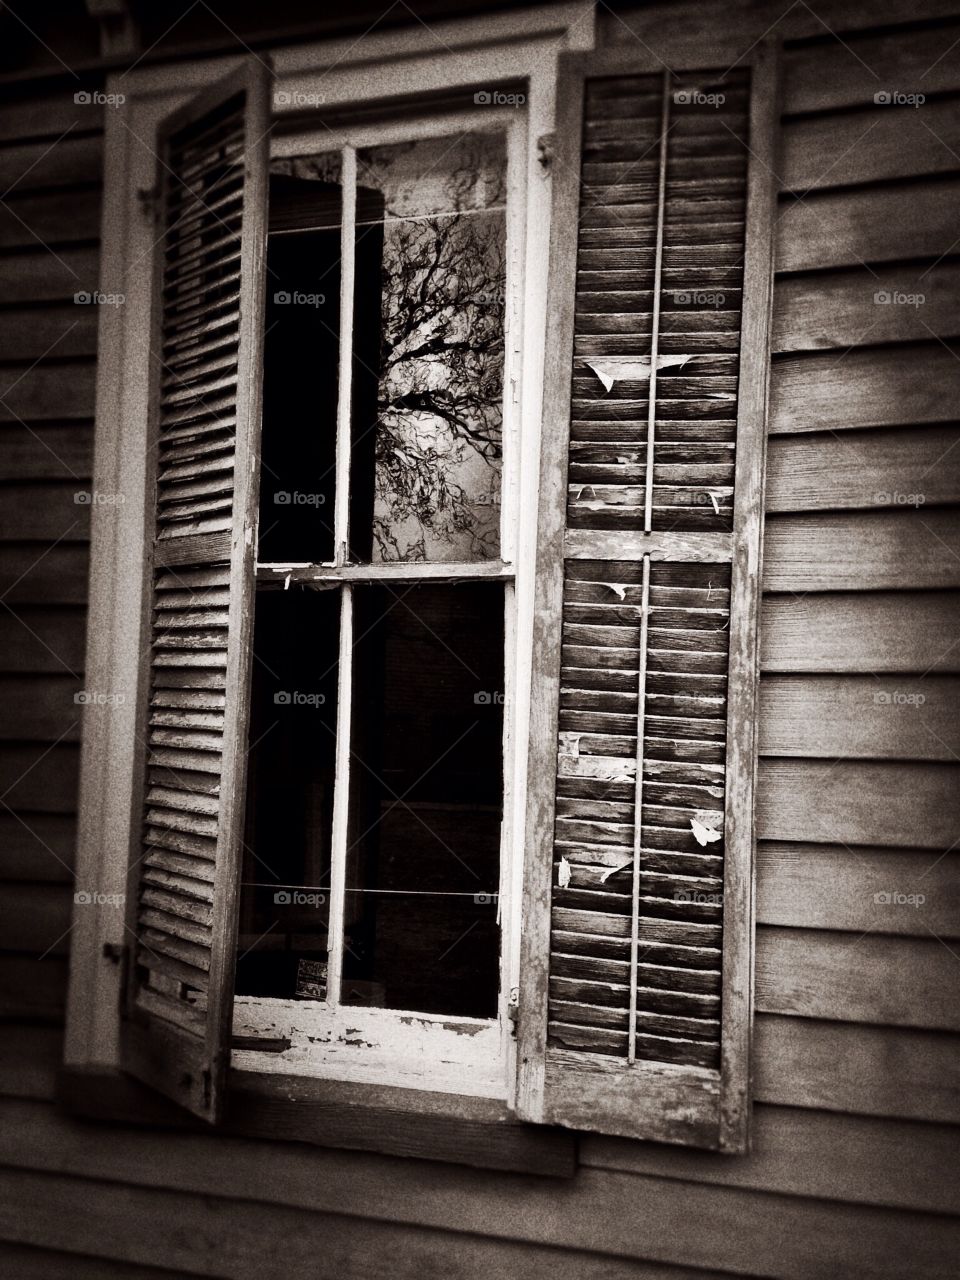 Mansard window. Window and shutters from historic home.